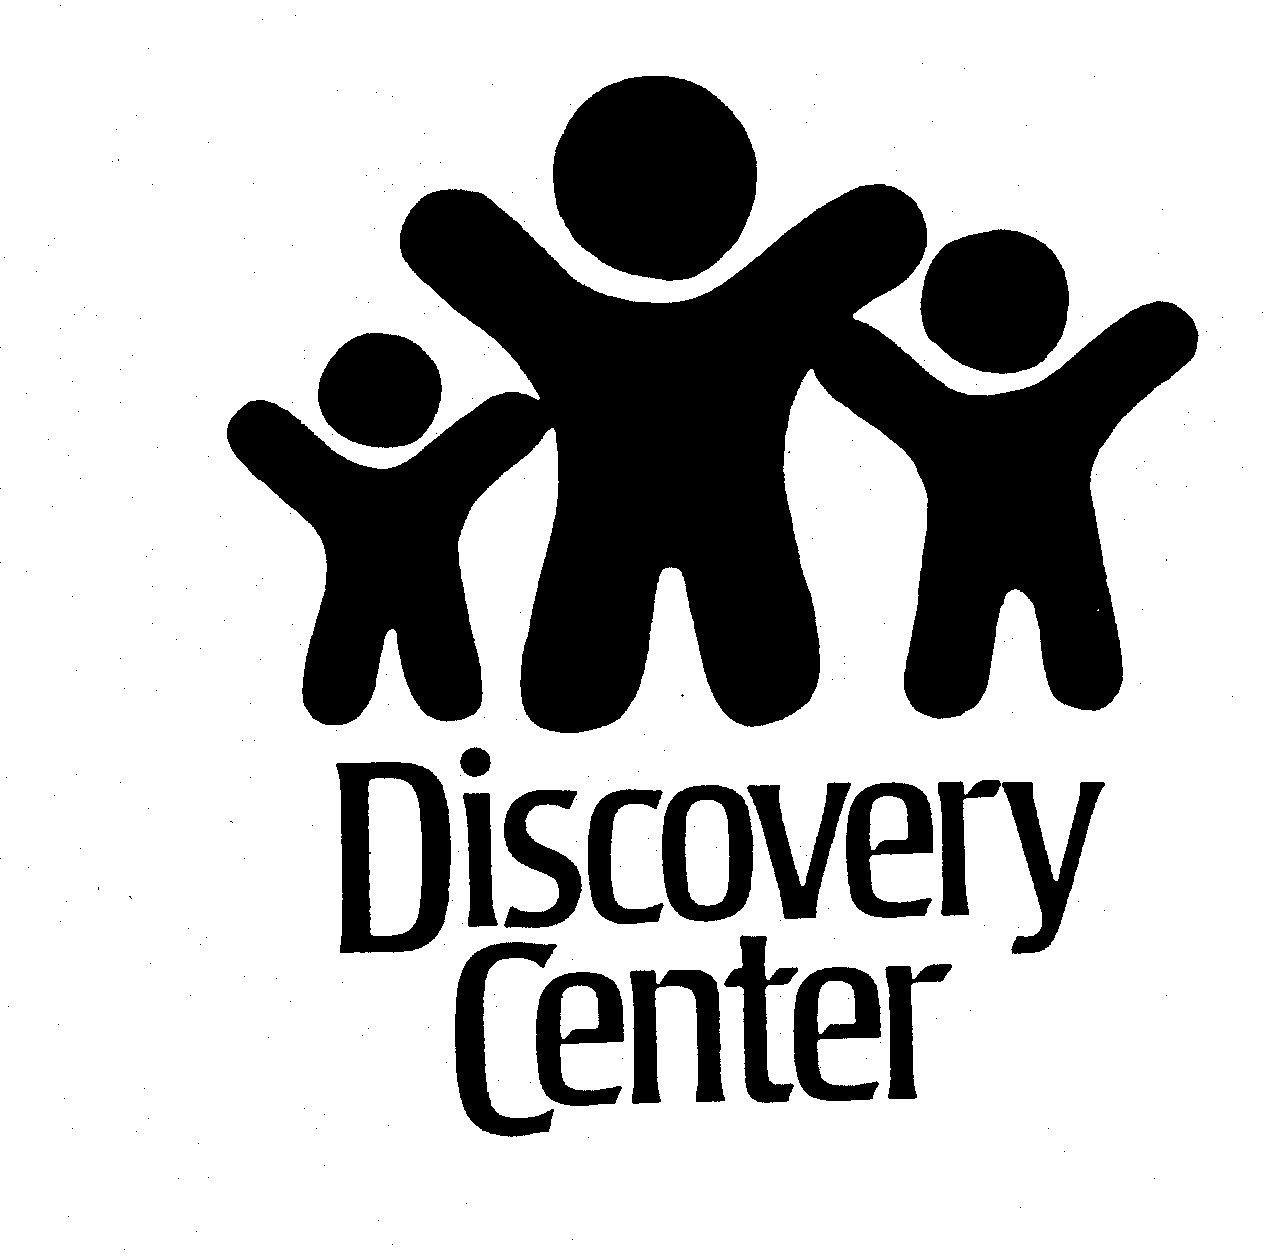 DISCOVERY CENTER